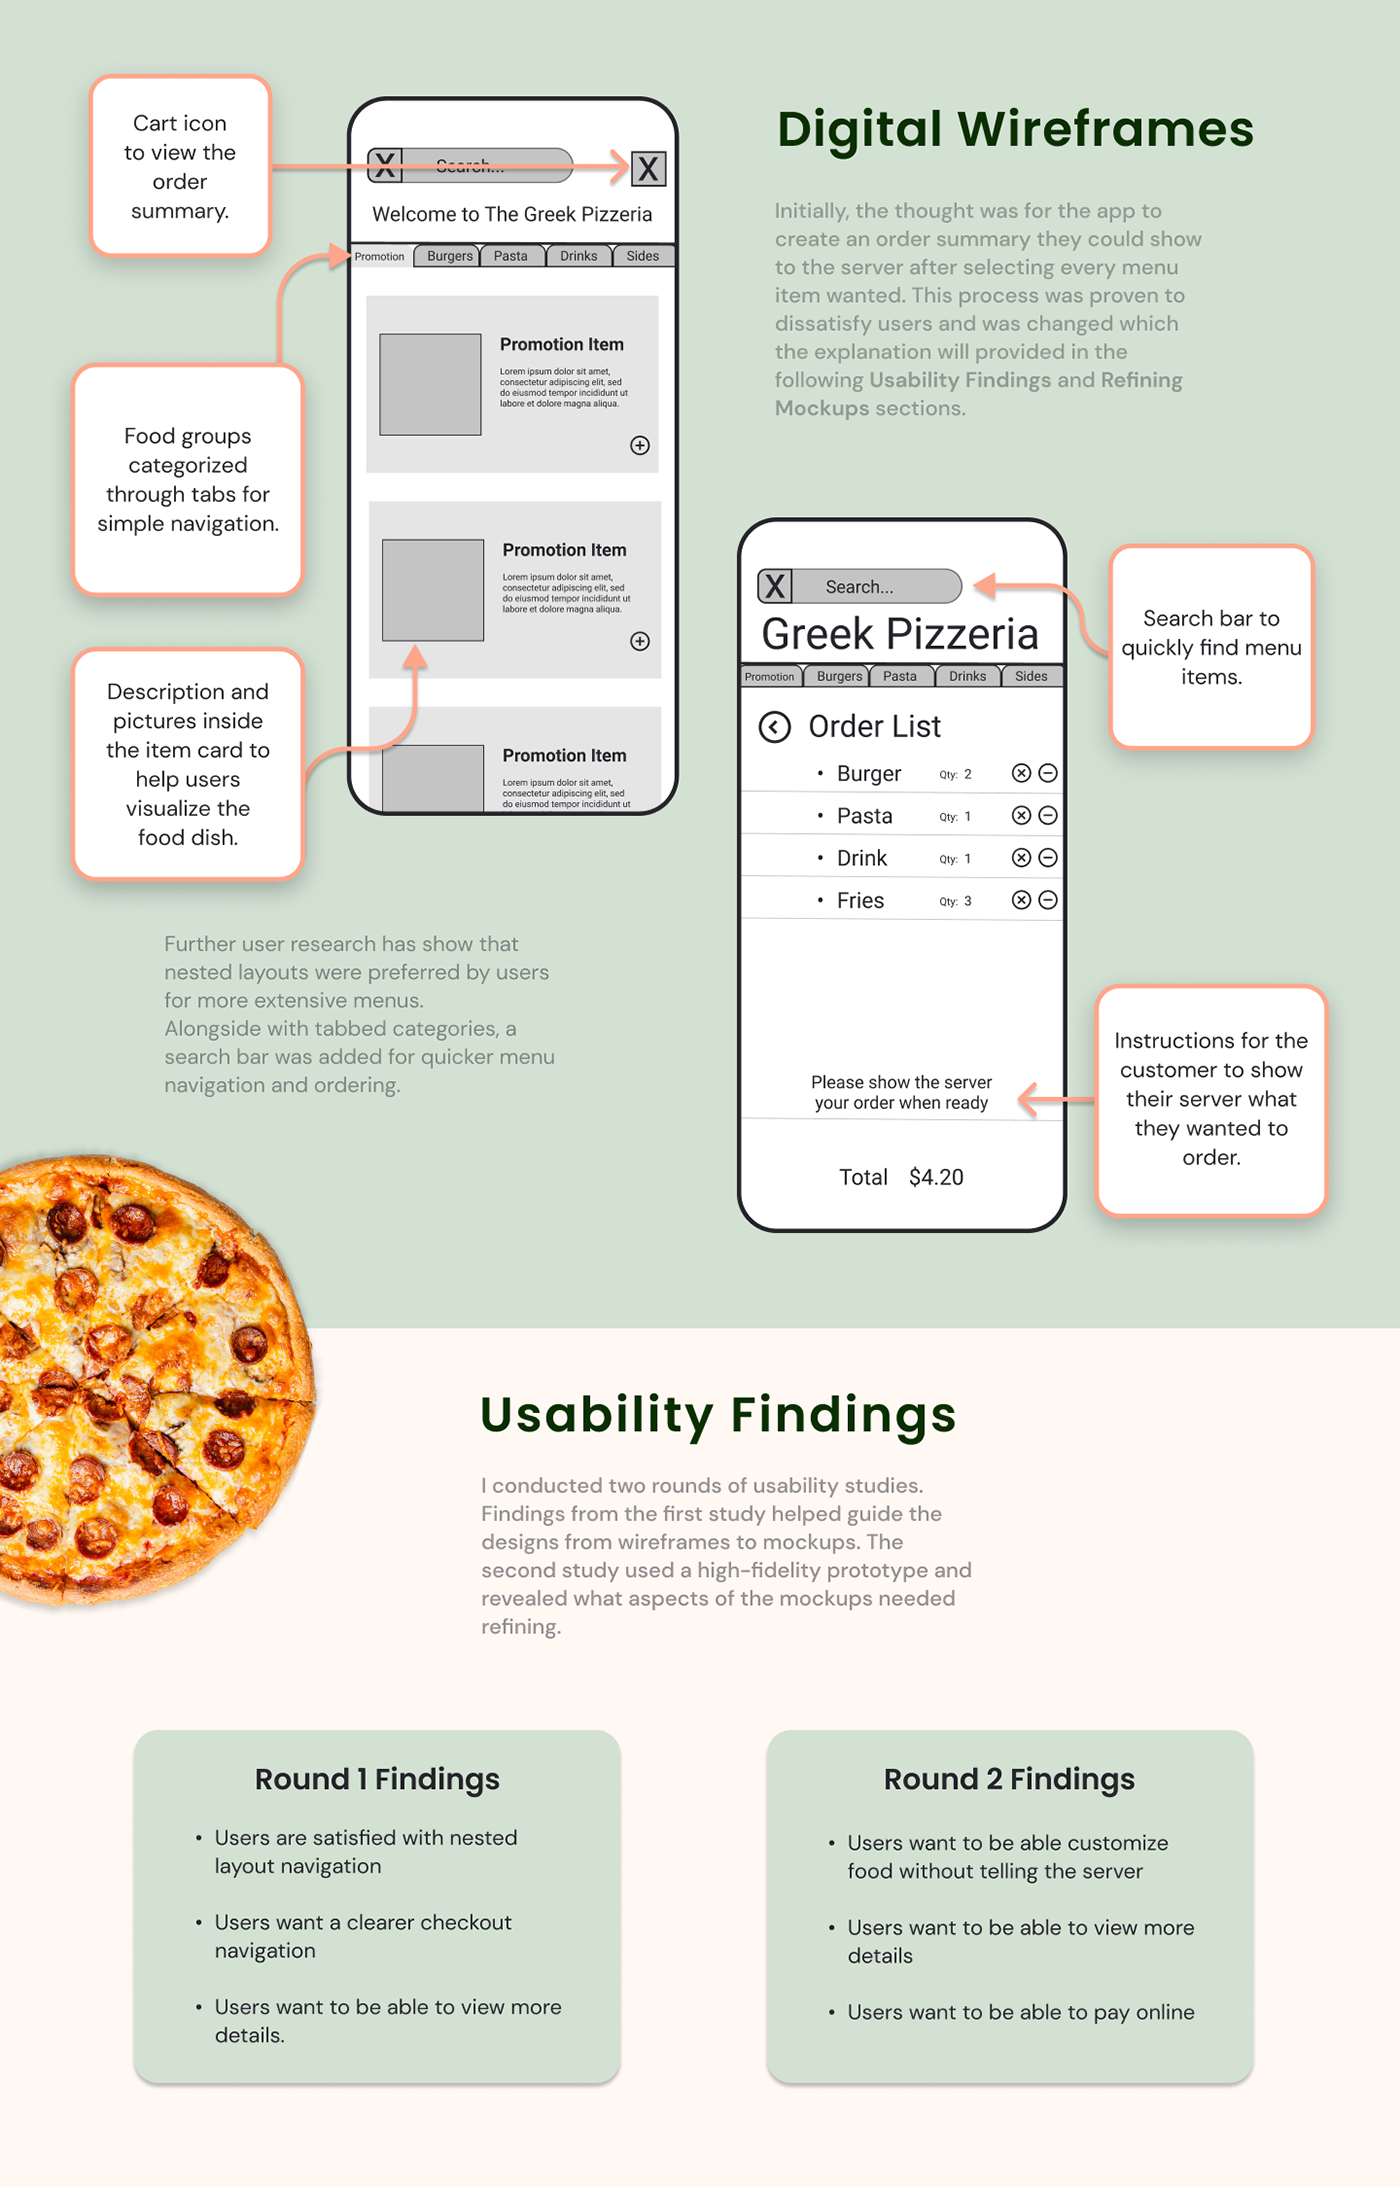 digital wireframes and usability findings.